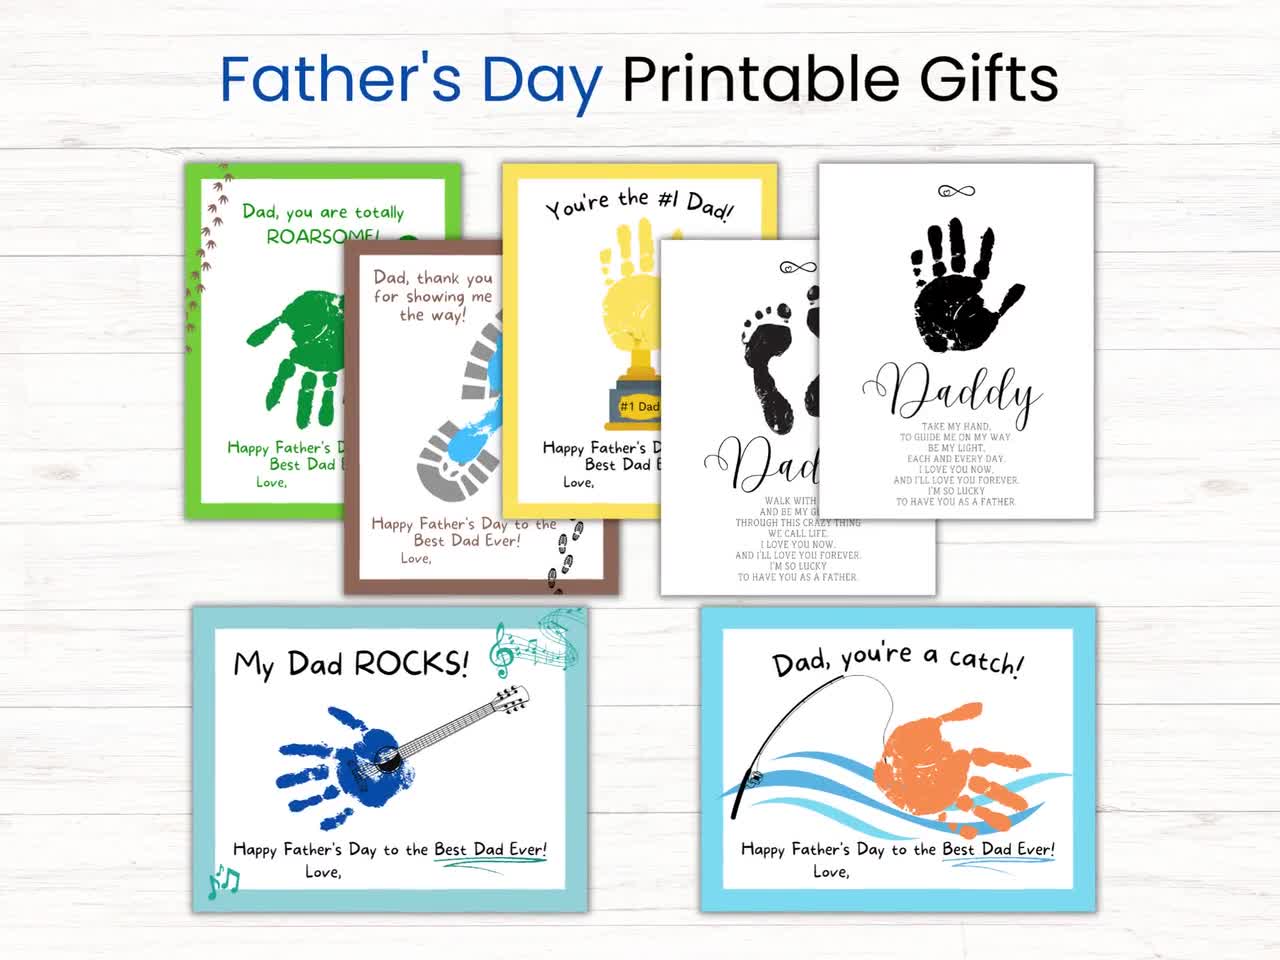 Our Family Handprint Art Printable Fathers Day Handprint Art Gift for New  Dad First Fathers Day 